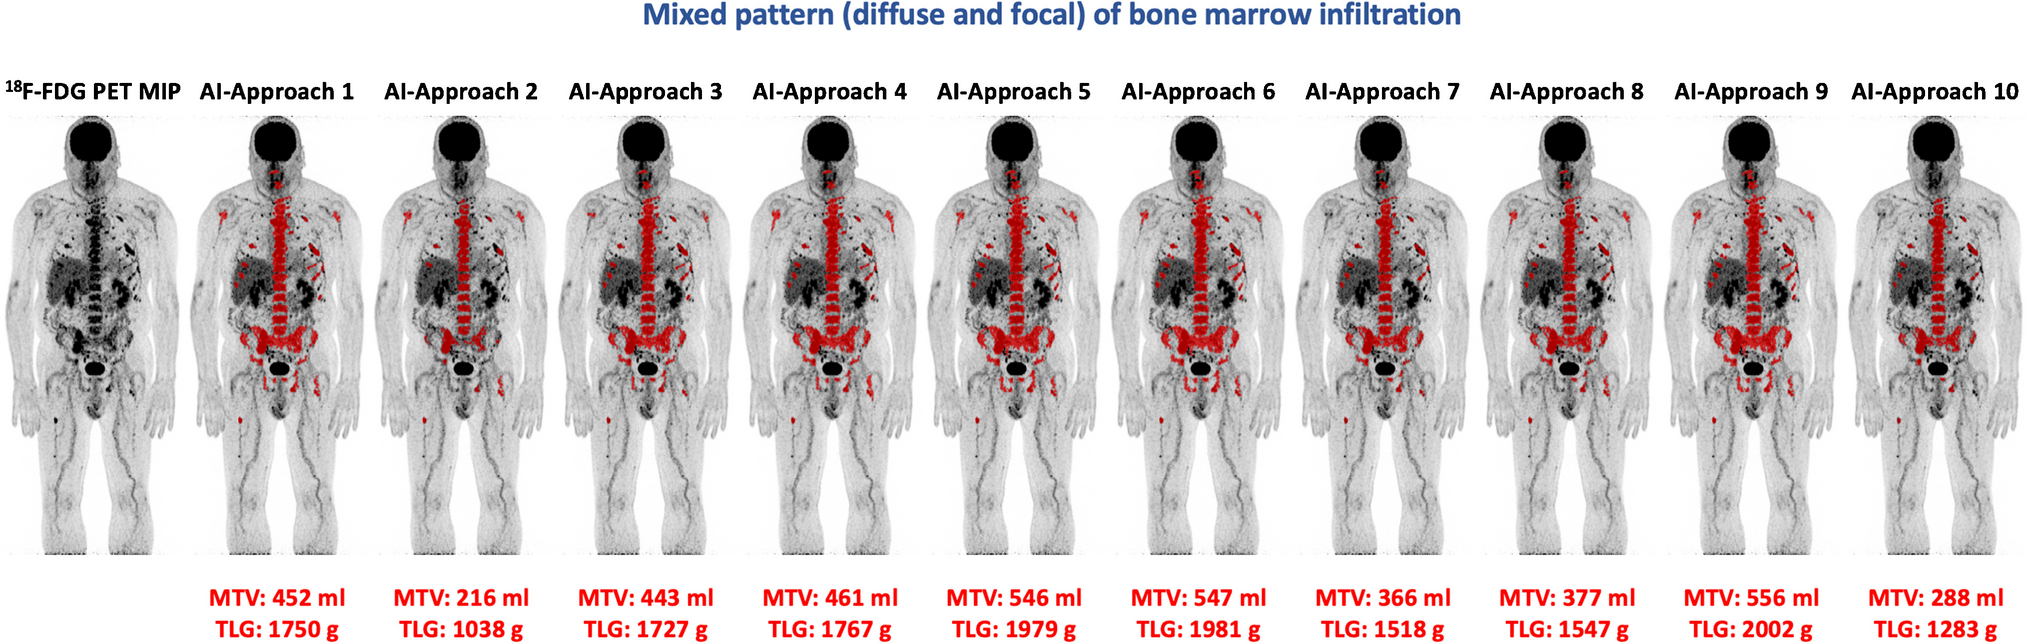 Artificial intelligence–based, volumetric assessment of the bone marrow metabolic activity in [18F]FDG PET/CT predicts survival in multiple myeloma